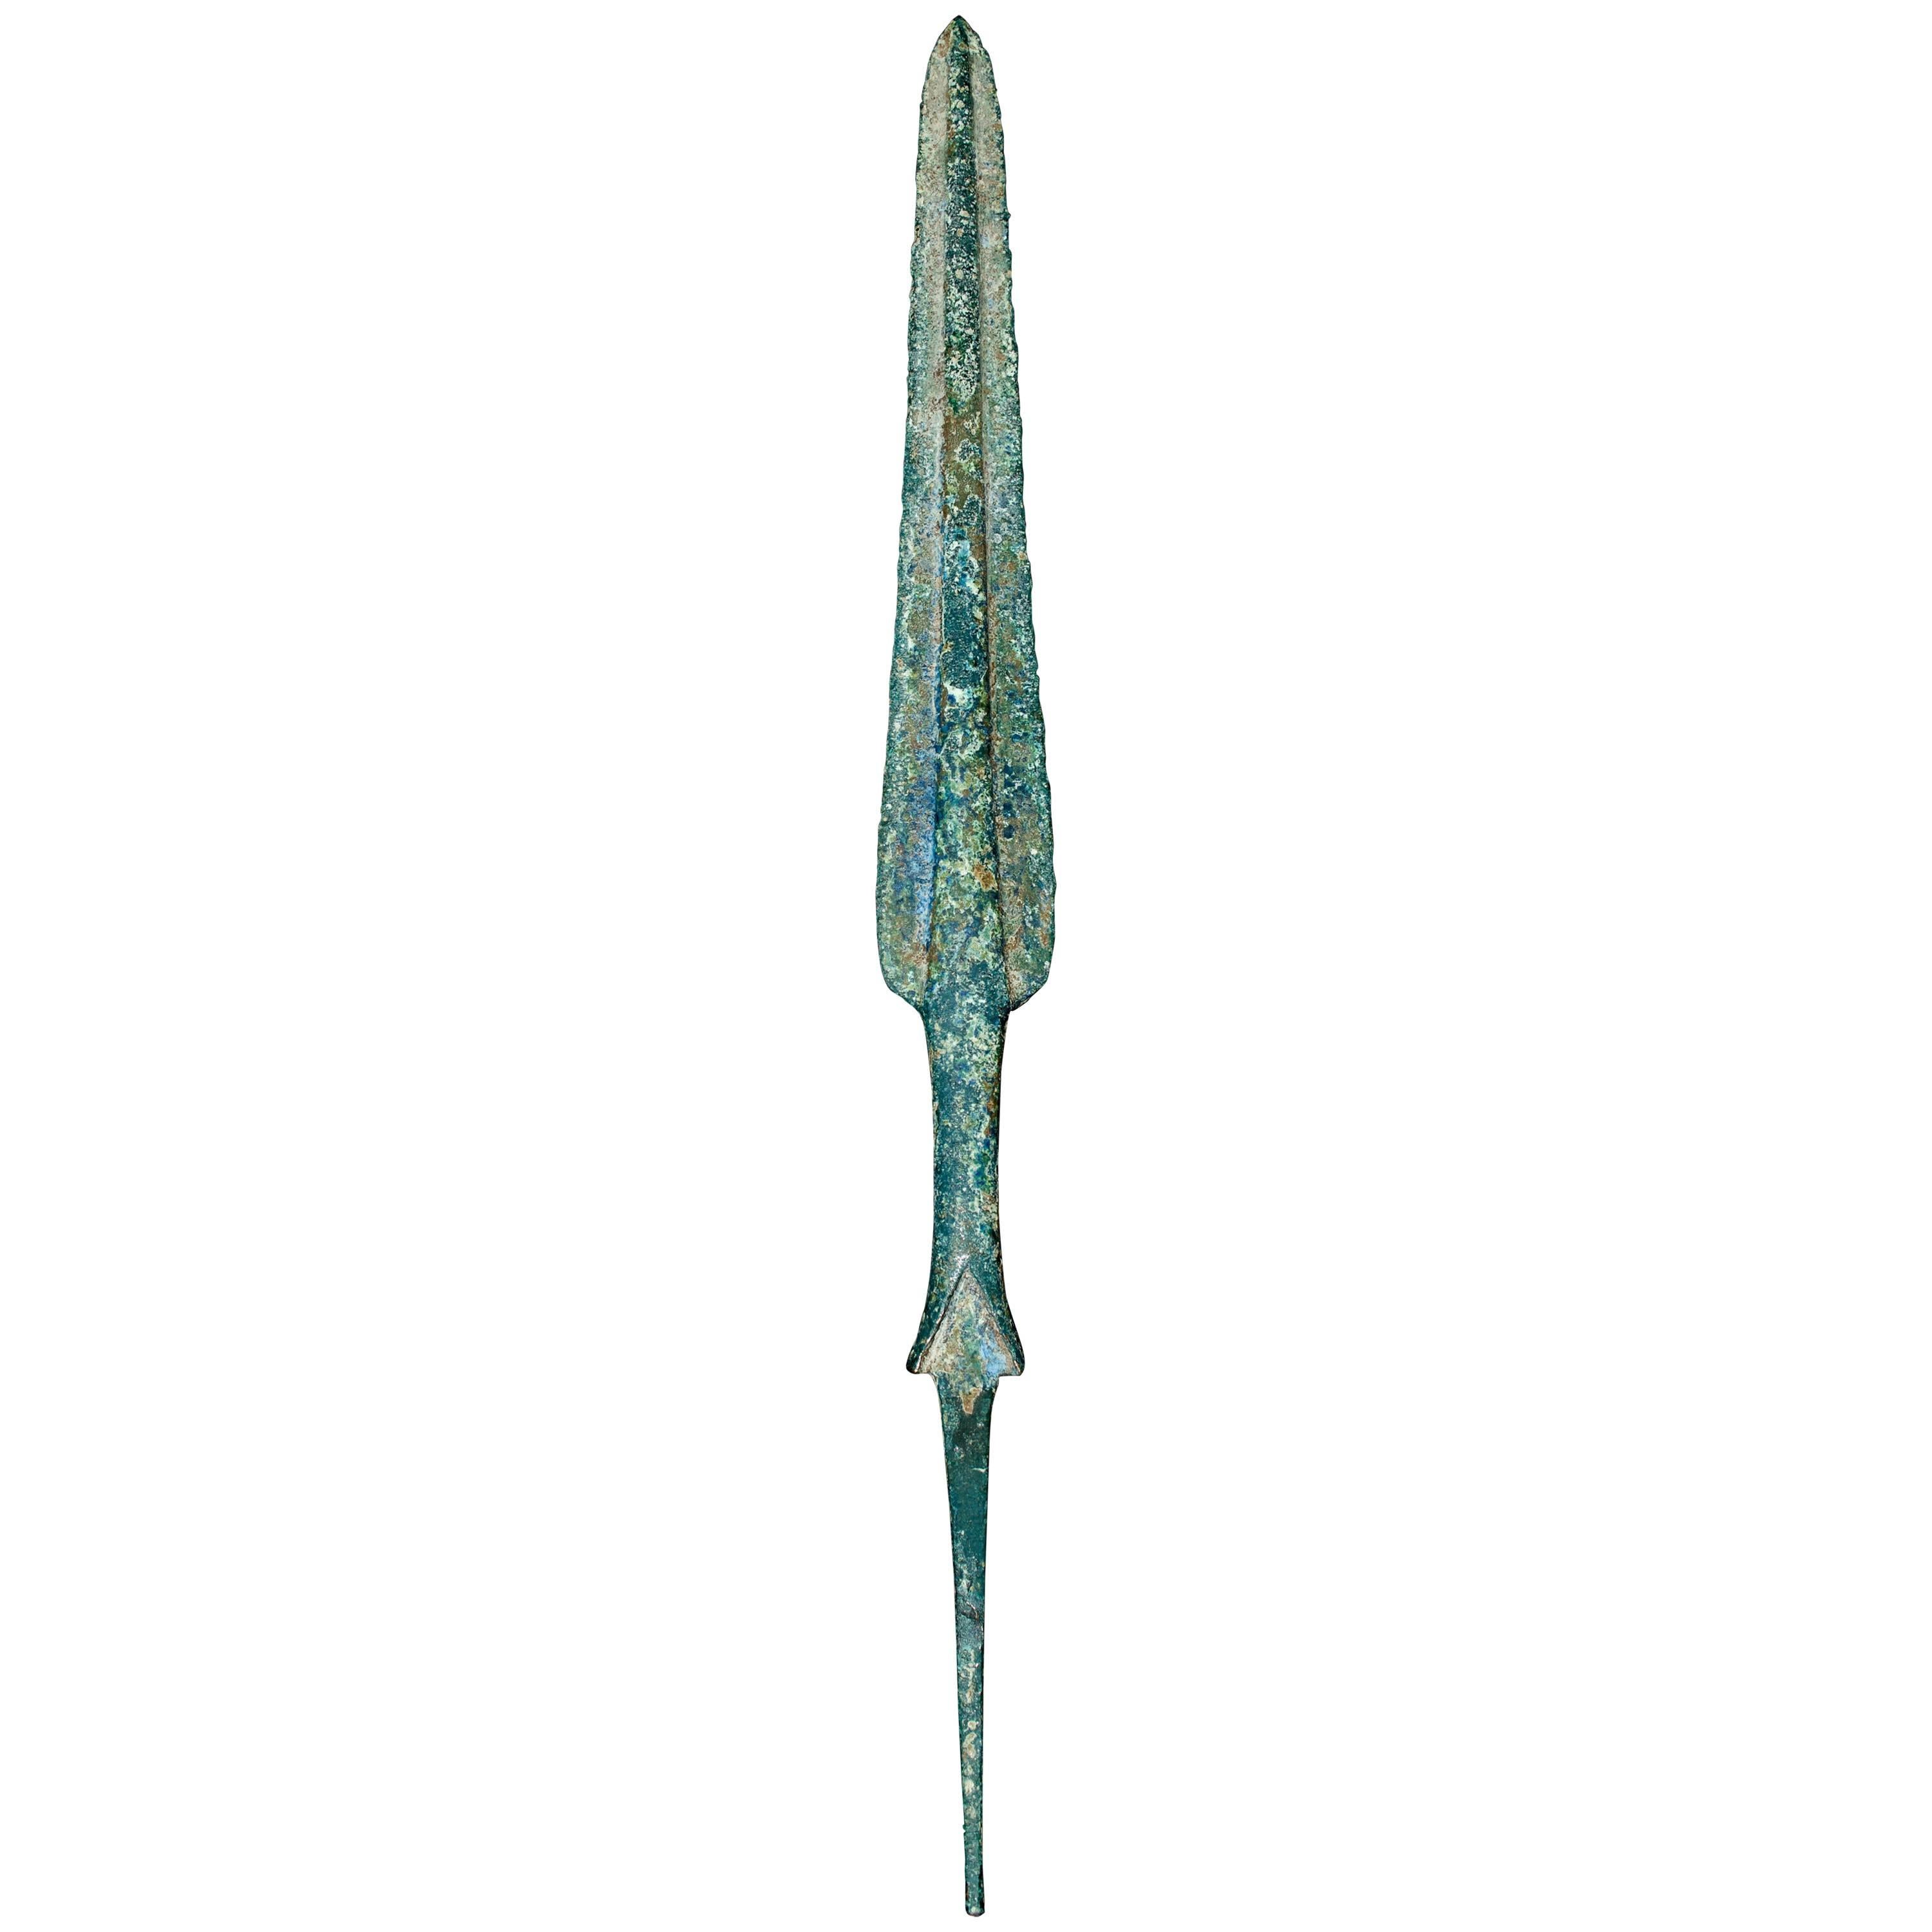 Ancient Luristan Bronze Spear Head // Early Iron Age Weapon